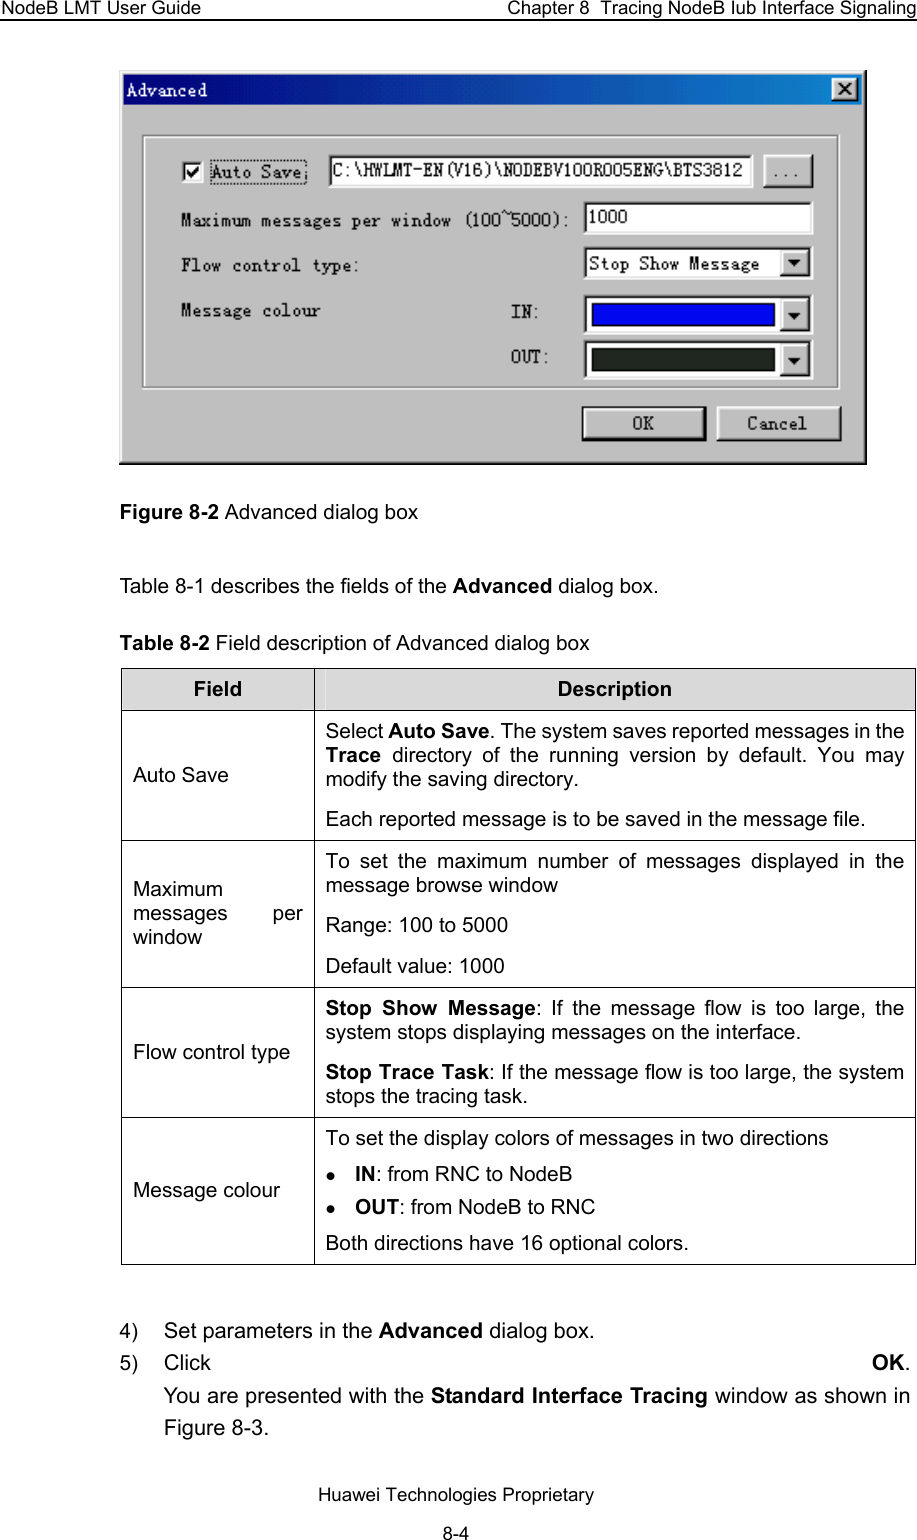 NodeB LMT User Guide  Chapter 8  Tracing NodeB Iub Interface Signaling  Figure 8-2 Advanced dialog box Table 8-1 describes the fields of the Advanced dialog box. Table 8-2 Field description of Advanced dialog box  Field  Description  Auto Save Select Auto Save. The system saves reported messages in the Trace  directory of the running version by default. You may modify the saving directory.  Each reported message is to be saved in the message file. Maximum messages per window  To set the maximum number of messages displayed in the message browse window Range: 100 to 5000  Default value: 1000 Flow control type Stop Show Message: If the message flow is too large, the system stops displaying messages on the interface.  Stop Trace Task: If the message flow is too large, the system stops the tracing task.  Message colour To set the display colors of messages in two directions  z IN: from RNC to NodeB z OUT: from NodeB to RNC Both directions have 16 optional colors.  4)  Set parameters in the Advanced dialog box. 5)  Click  OK.  You are presented with the Standard Interface Tracing window as shown in Figure 8-3.  Huawei Technologies Proprietary 8-4 